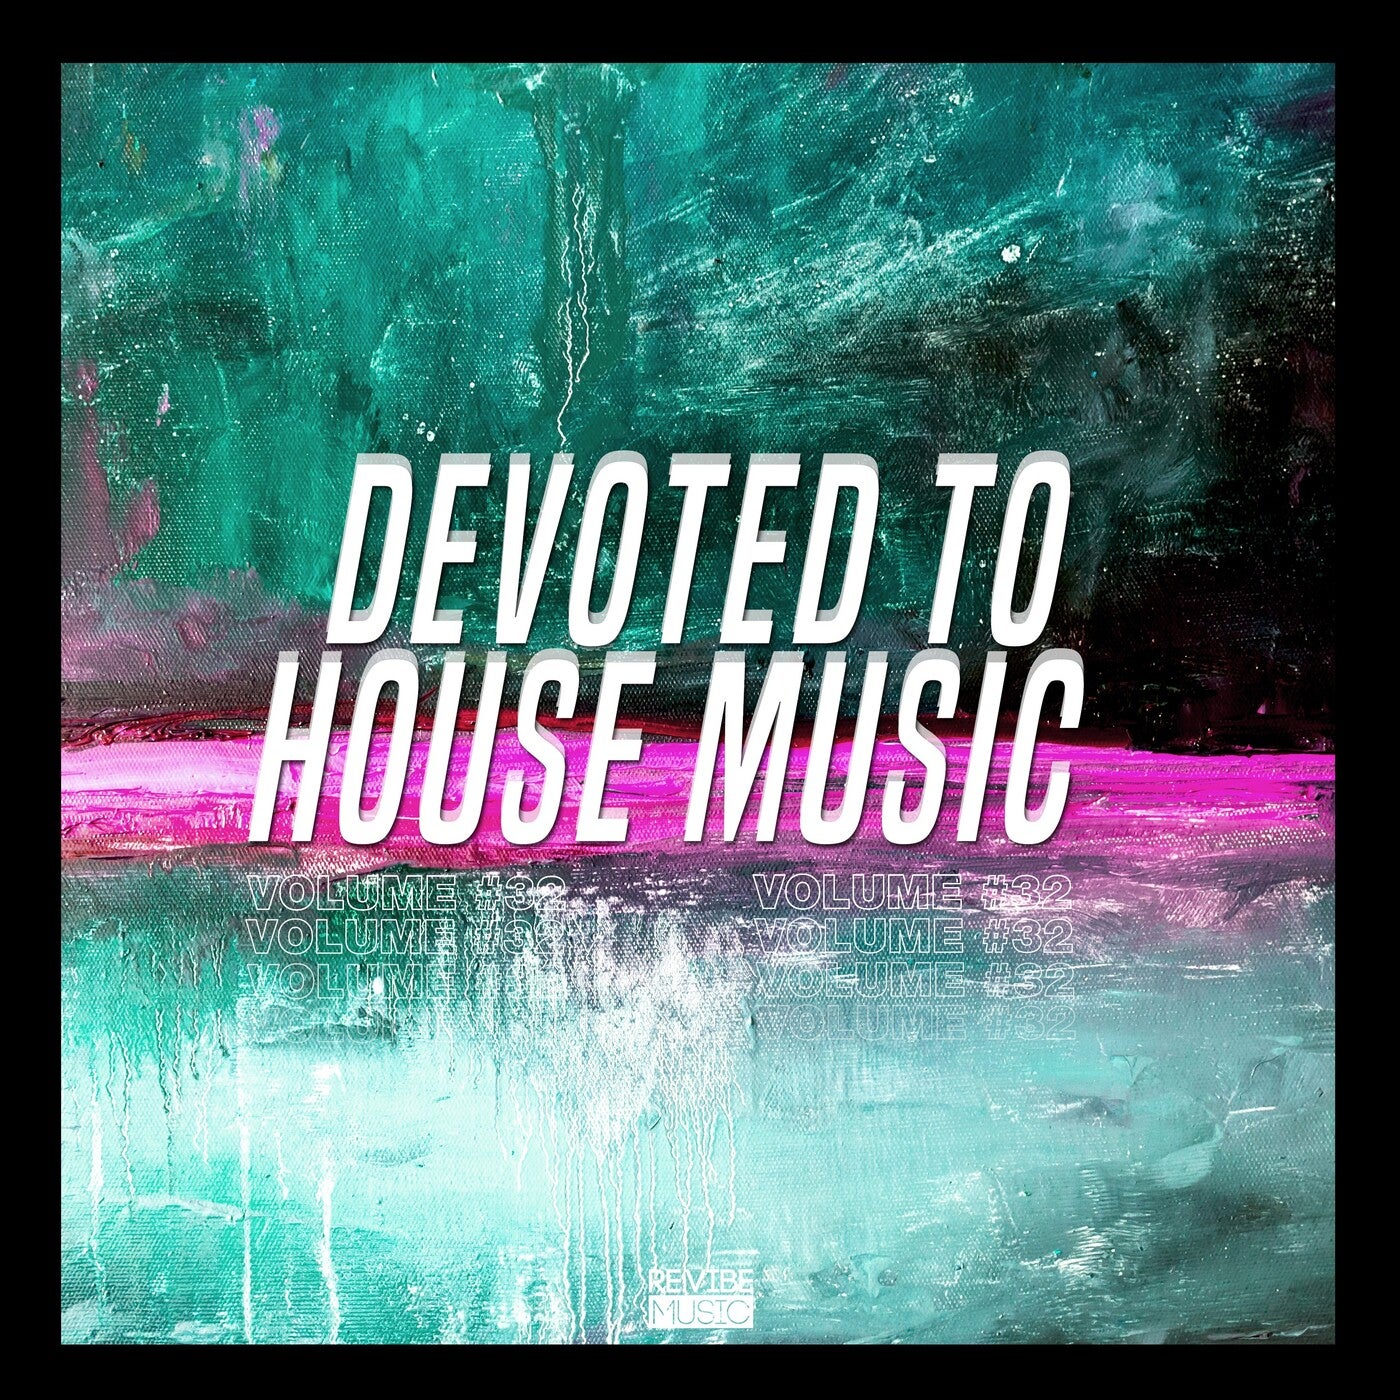 Devoted to House Music, Vol. 32